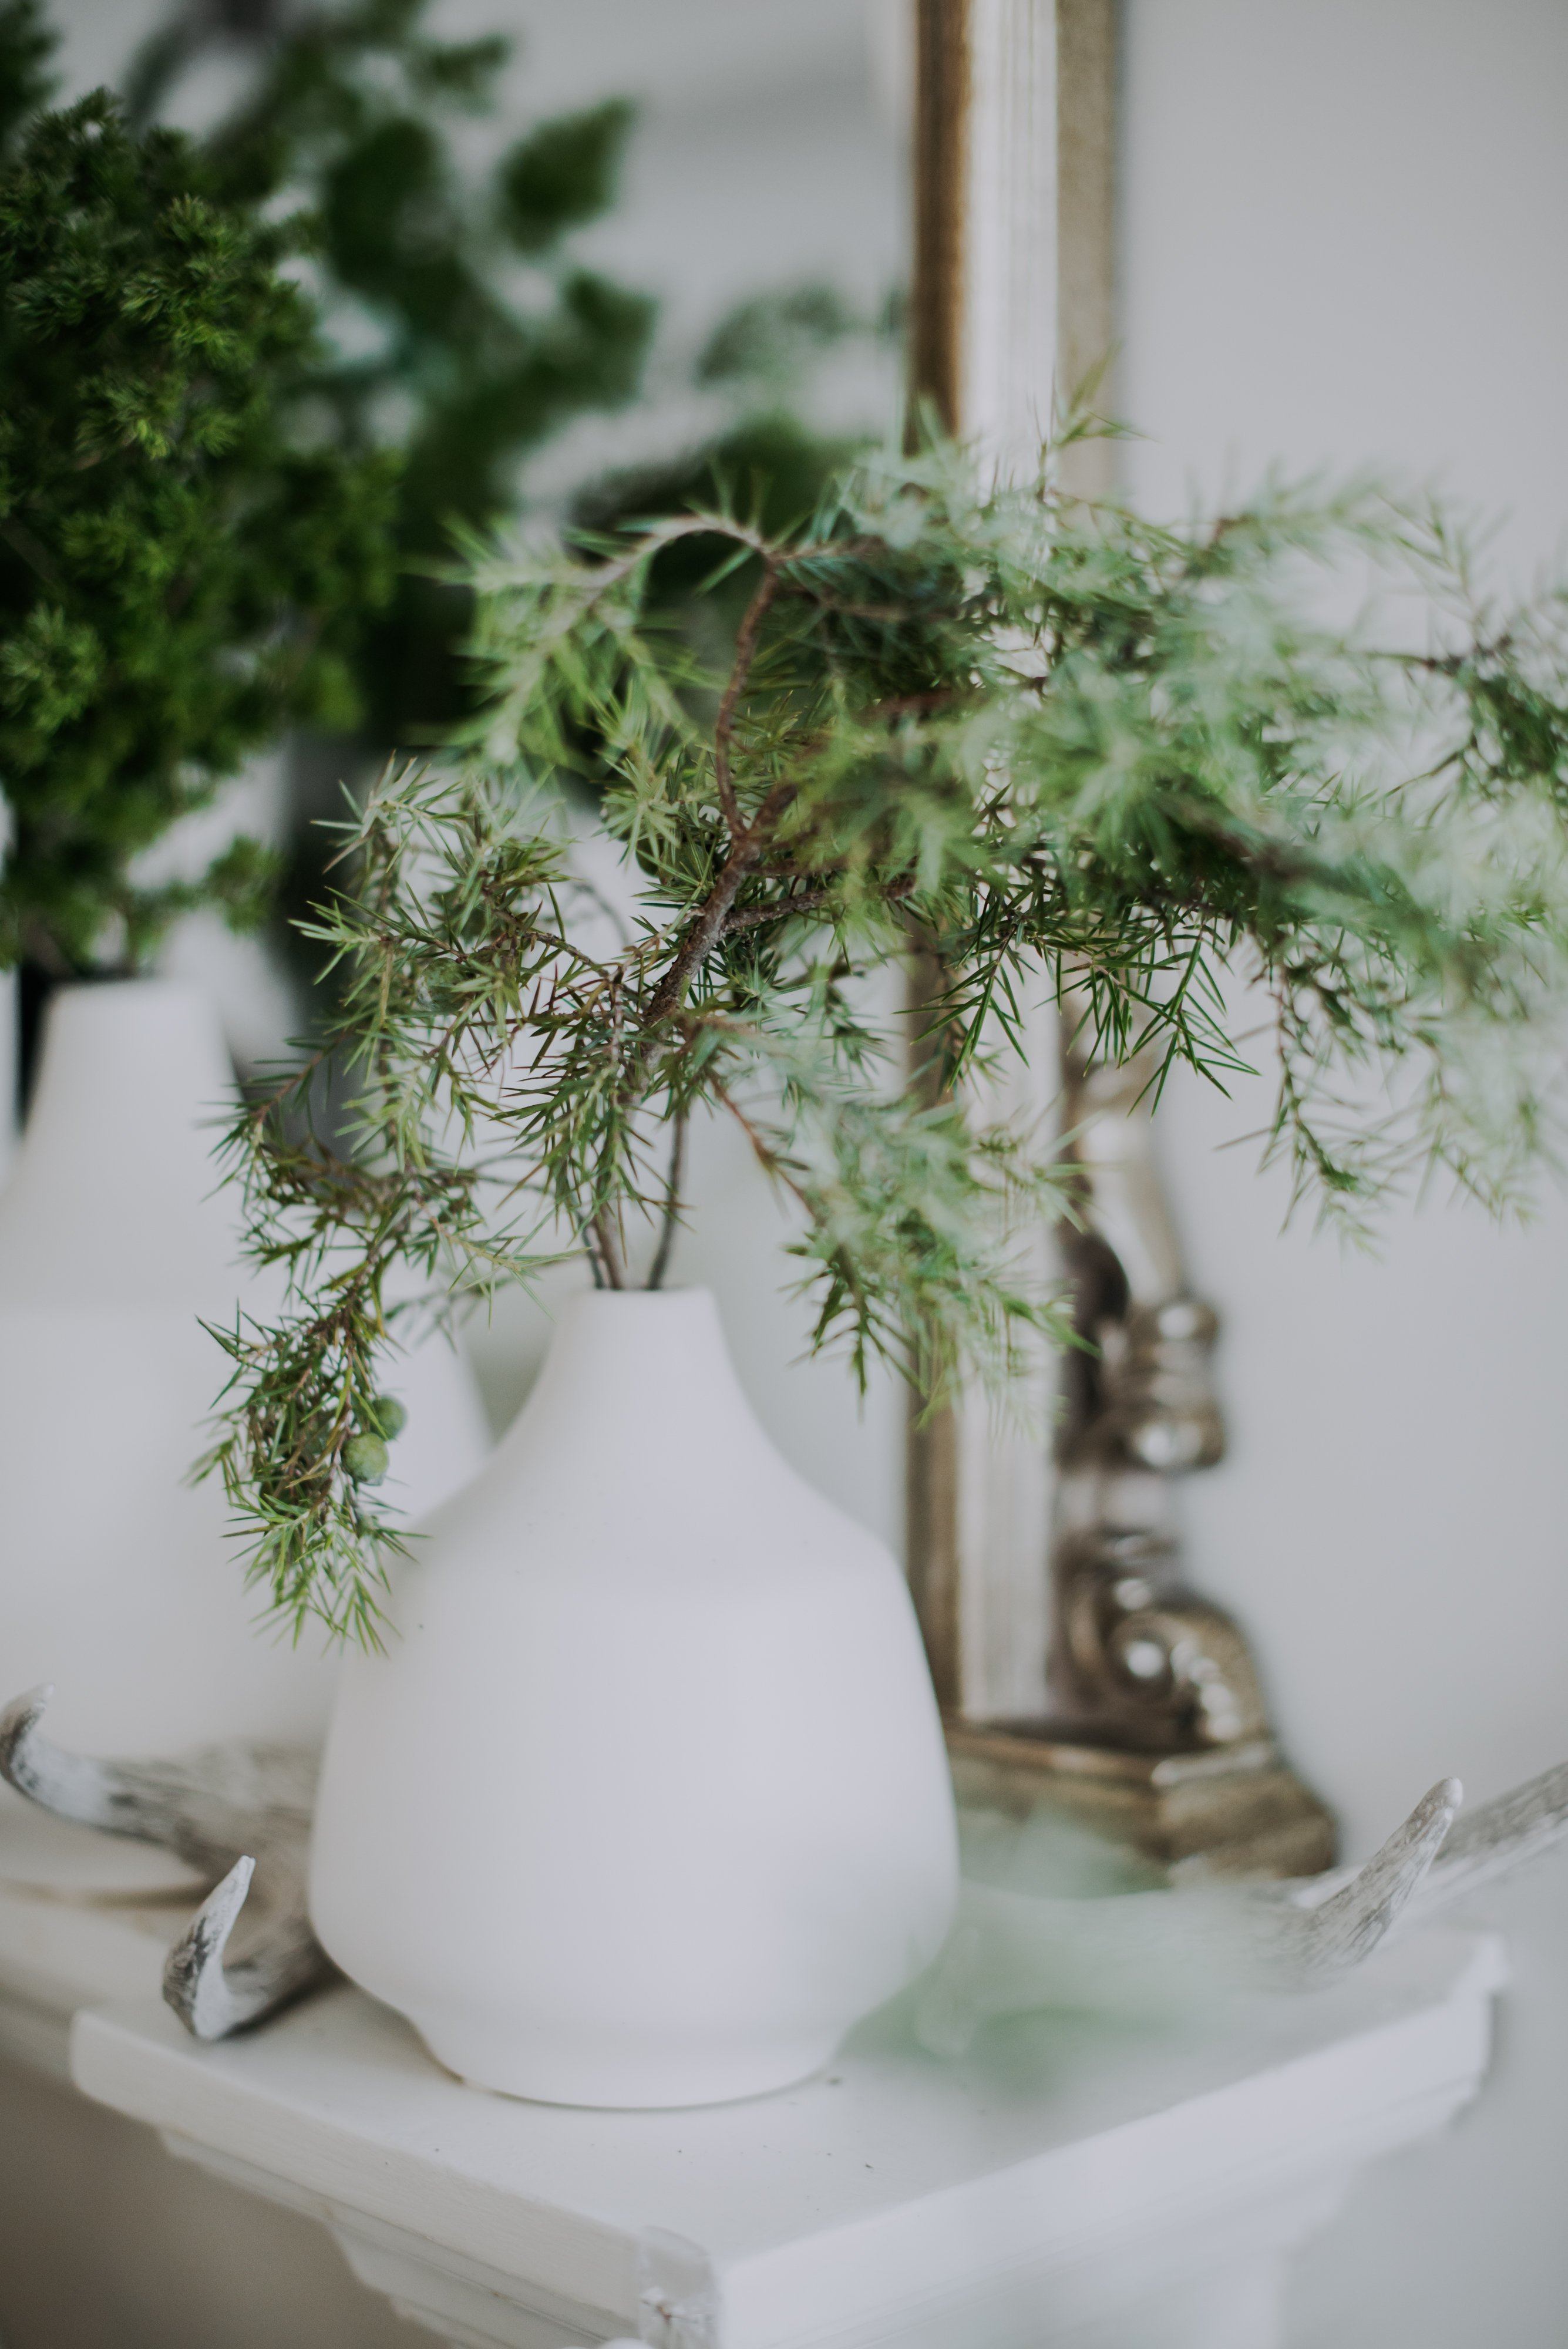 A minimalist ceramic vase with a narrowed top is adorned with two sprigs of pine twigs to accentuate the holiday spirit at Reitmans Holiday Brand Activation Brunch styled by Olive Studio in Toronto. 